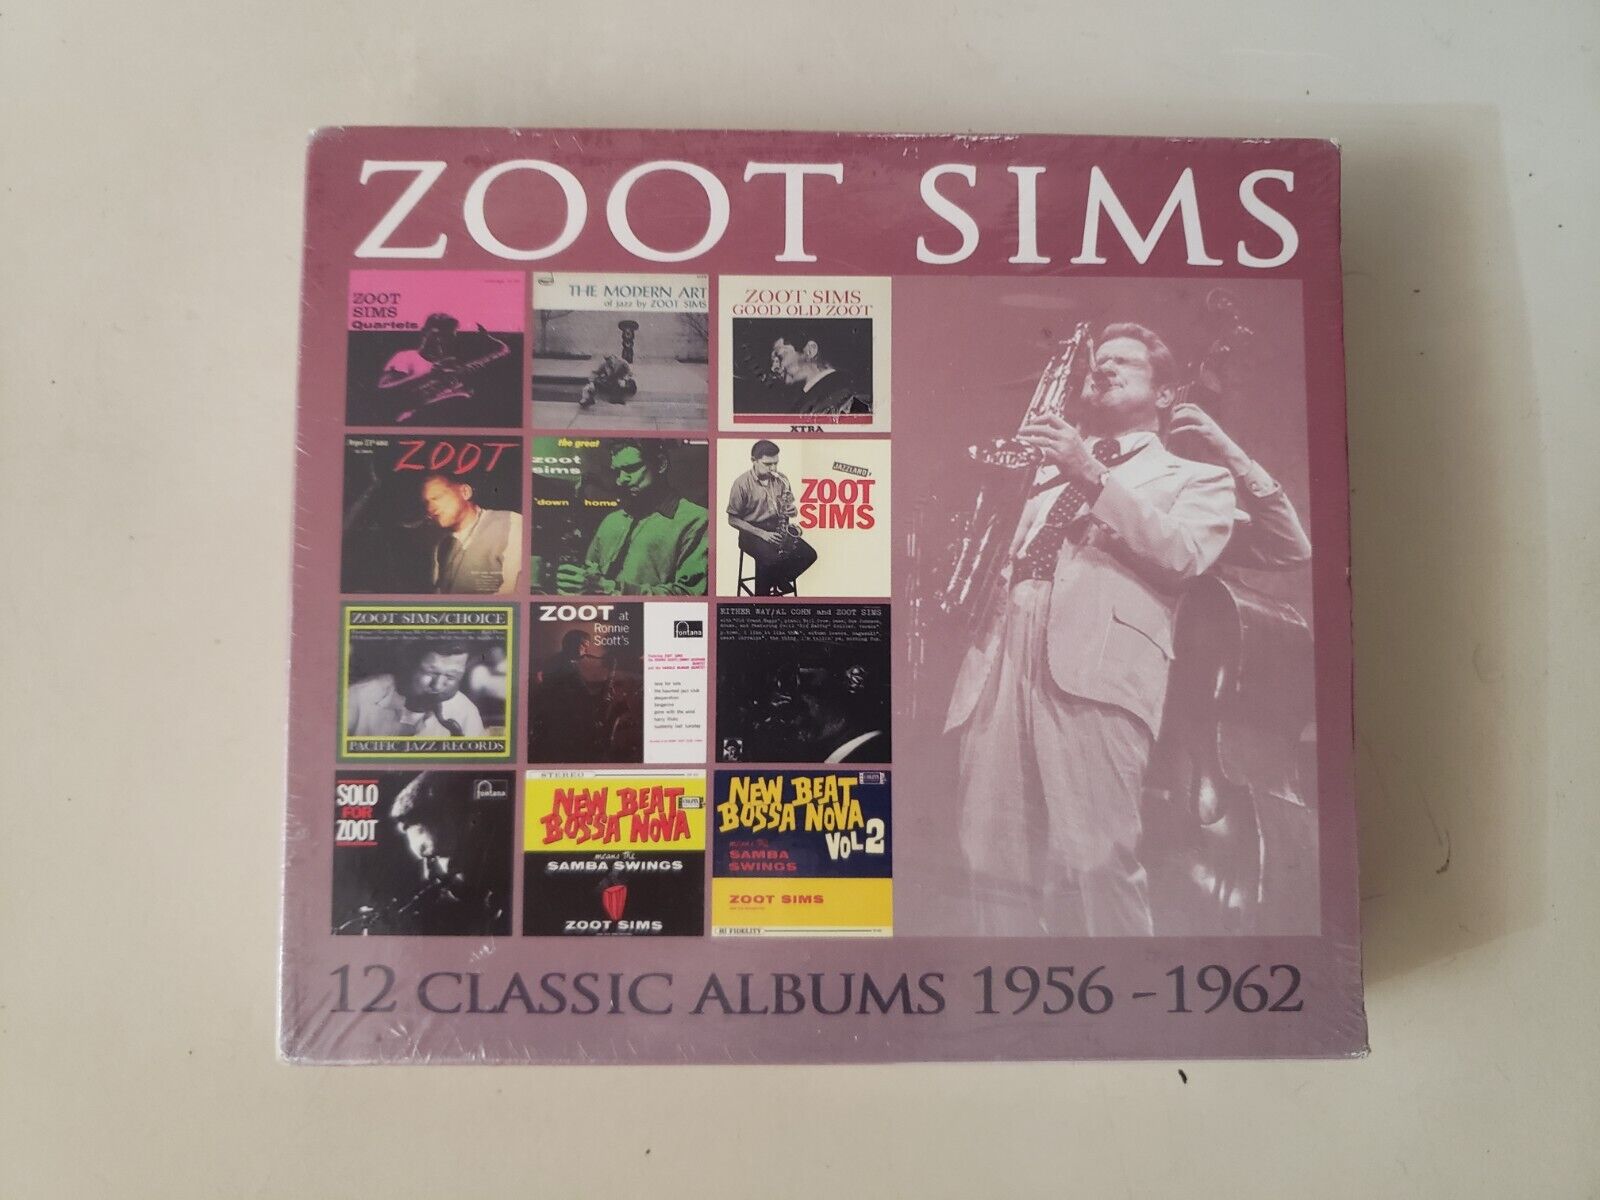 Zoot Sims – 12 Classic Albums 1956-1962 CD BOX SET - EN6CD9042 - 2015 NEW SEALED